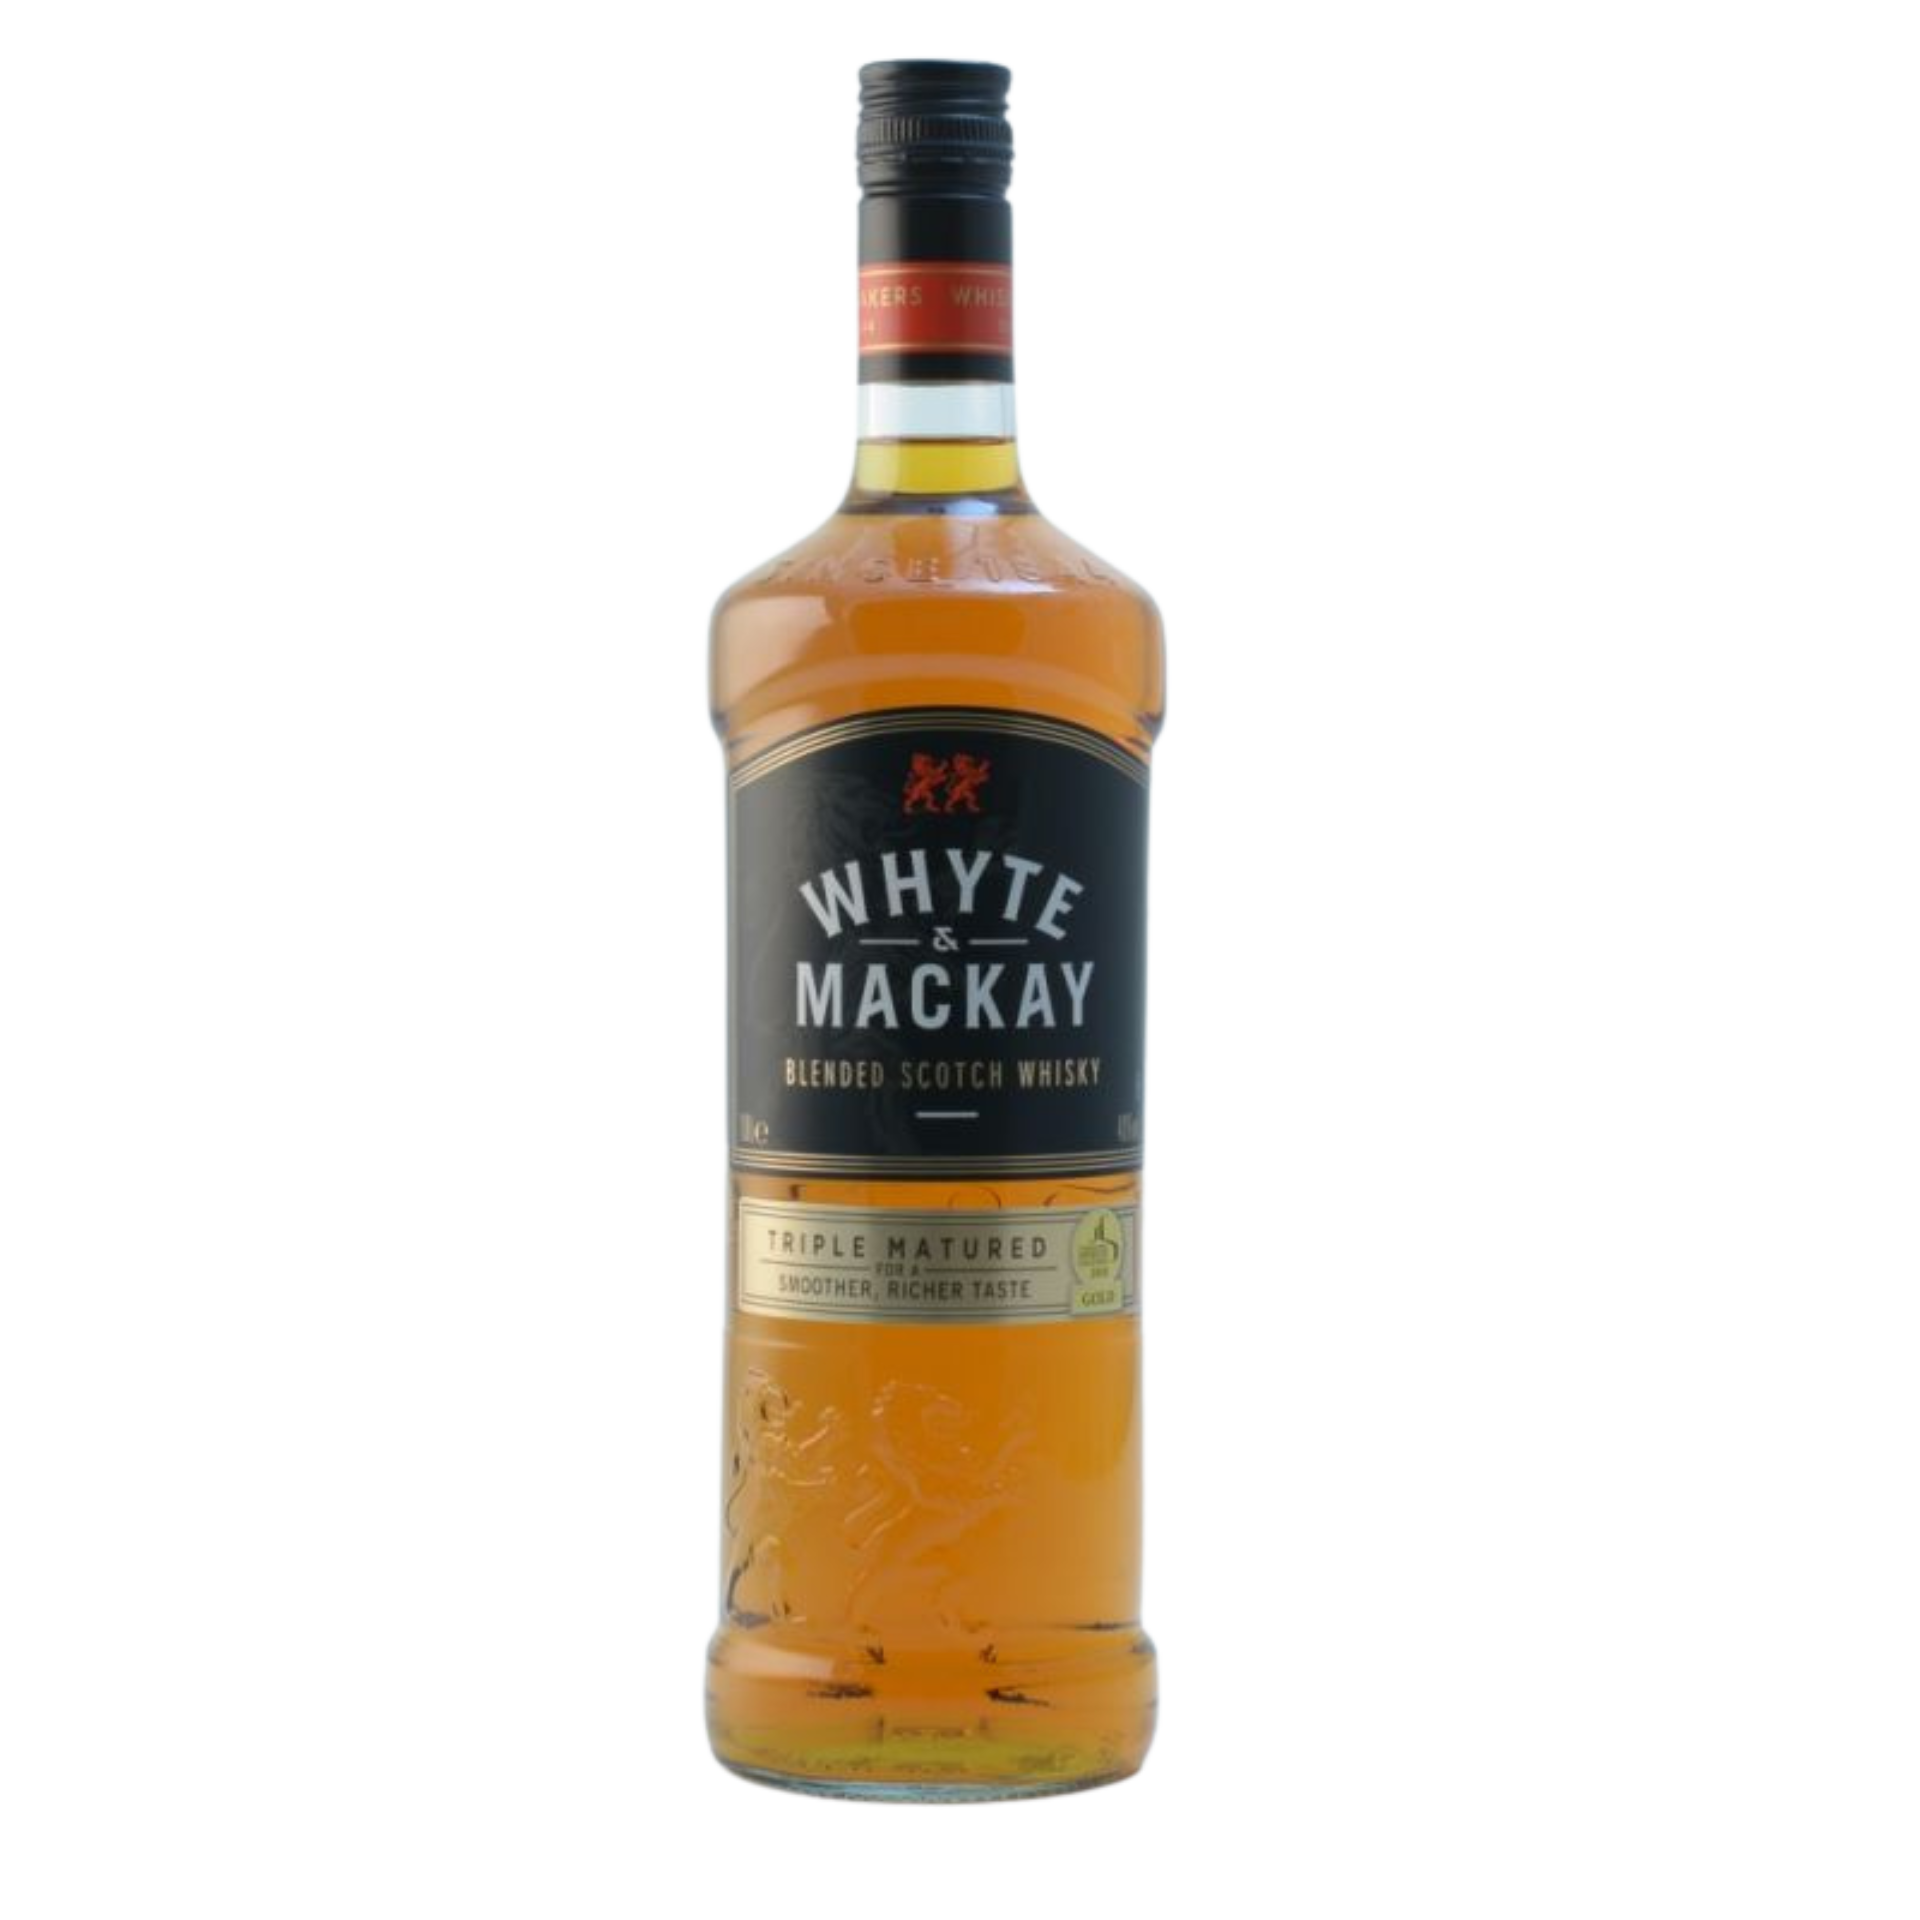 Whyte & Mackay Special Reserve Scotch Whisky 40% 1l